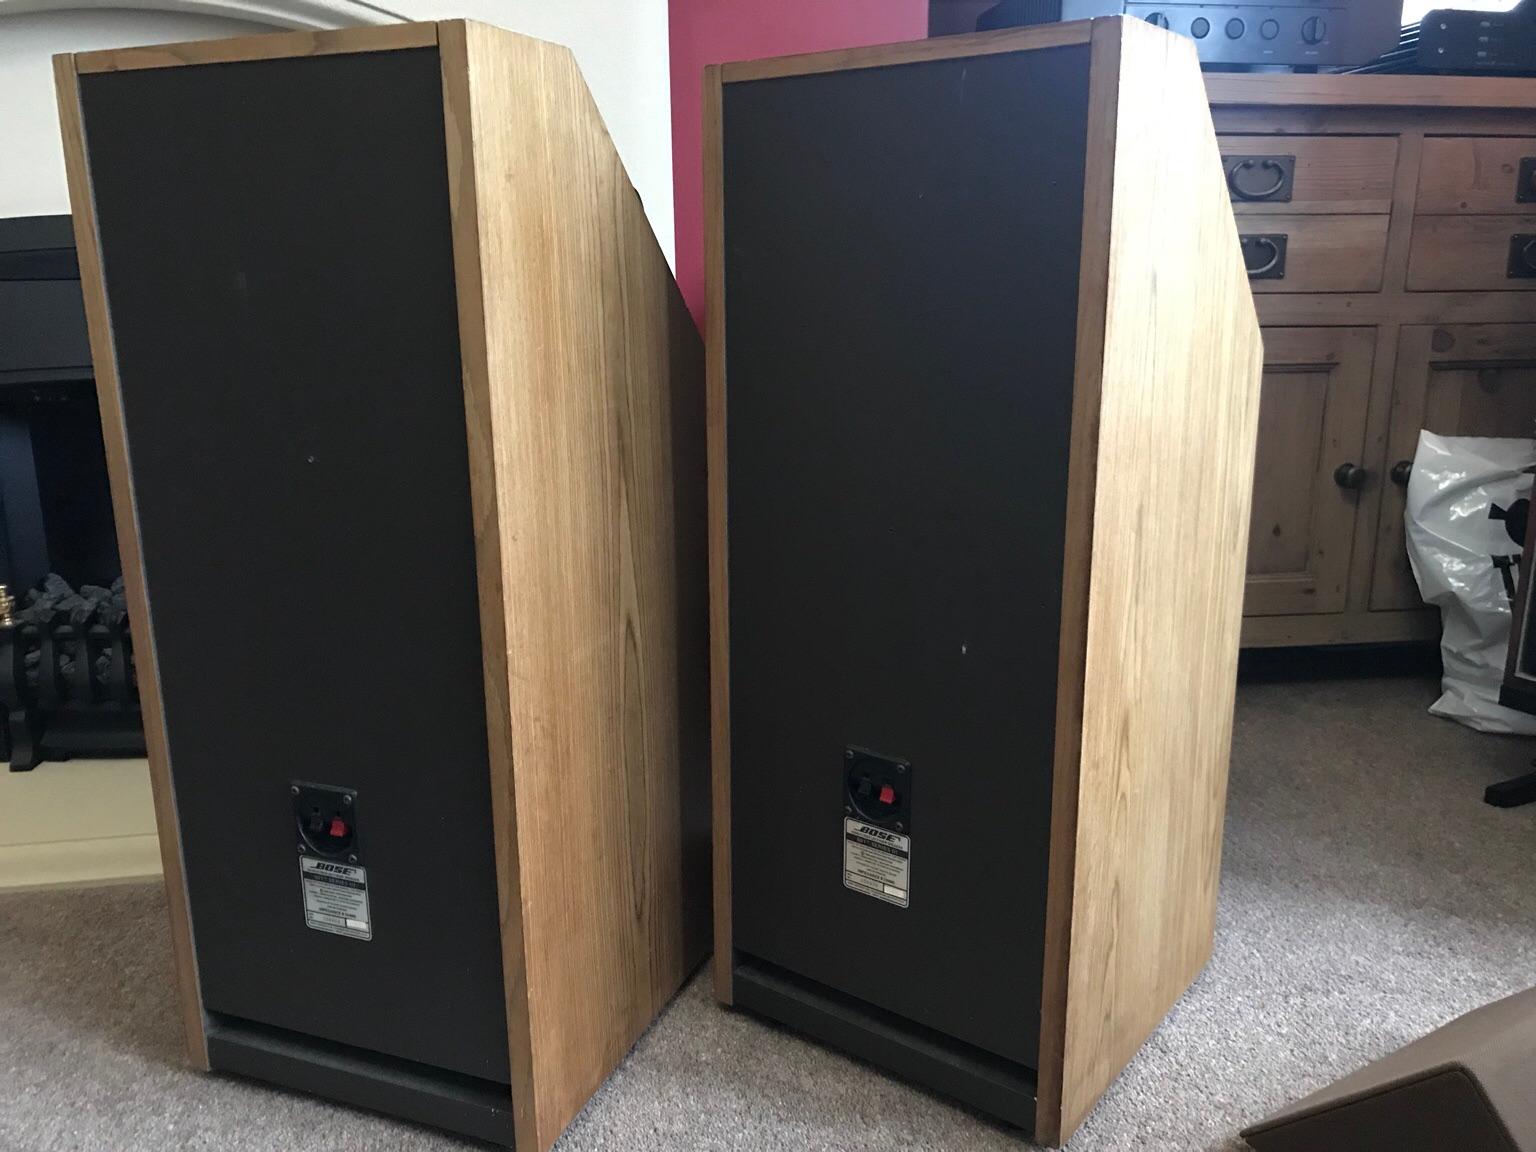 Bose 601 Series 3 Direct/ Reflecting Speakers in North East Derbyshire